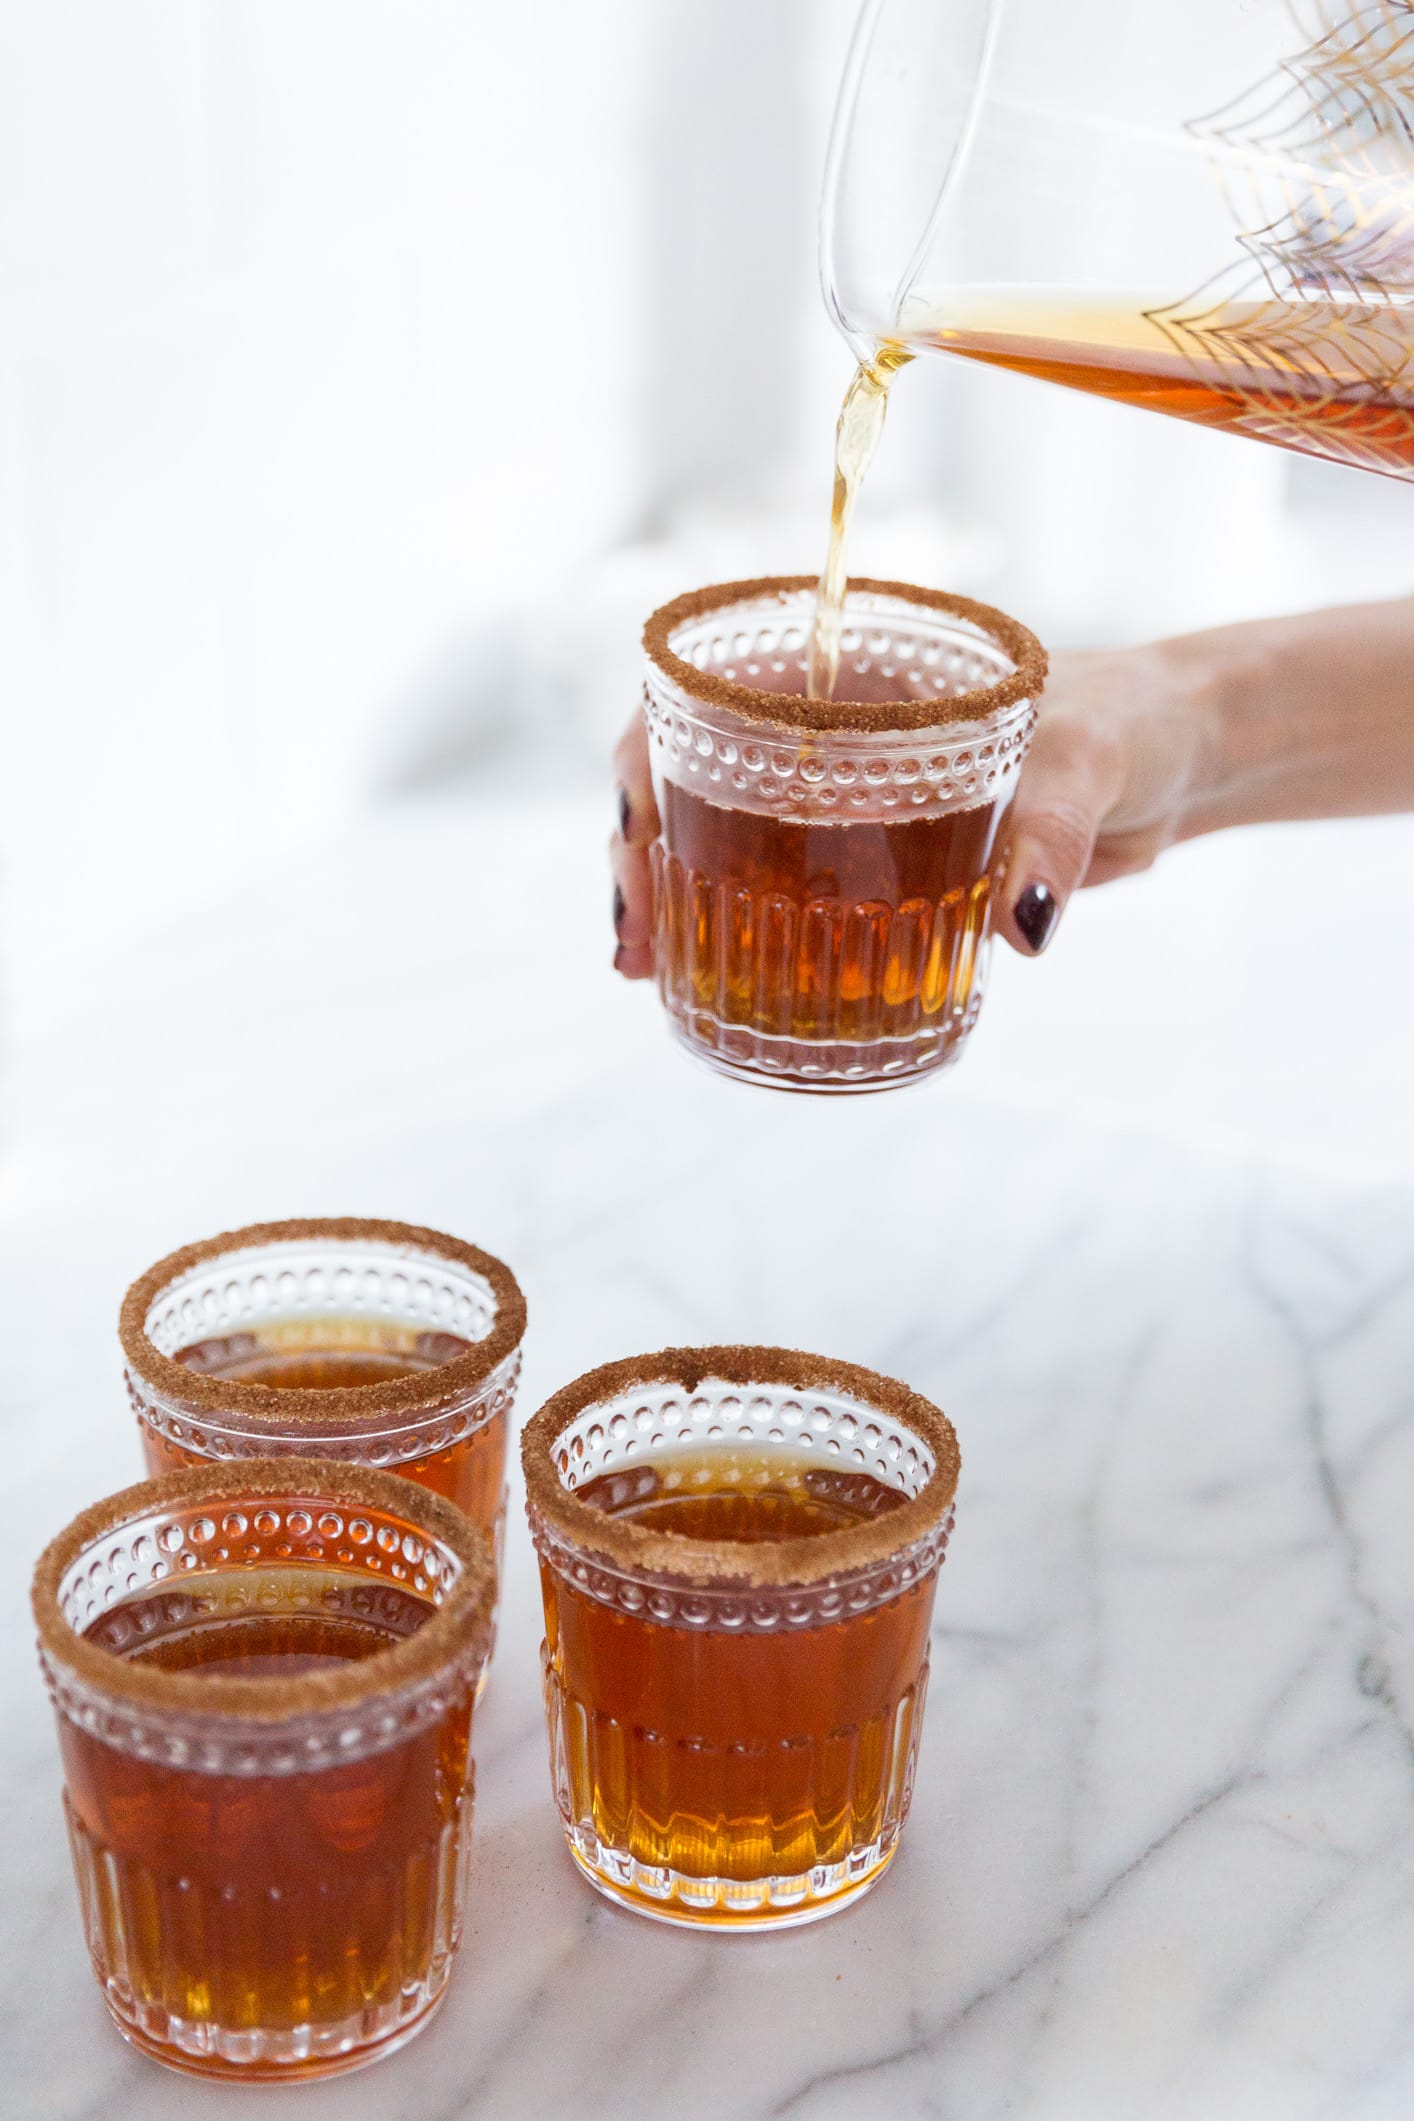 Louise Roe Non-Alcoholic Mulled Apple Cider Recipe For Winter